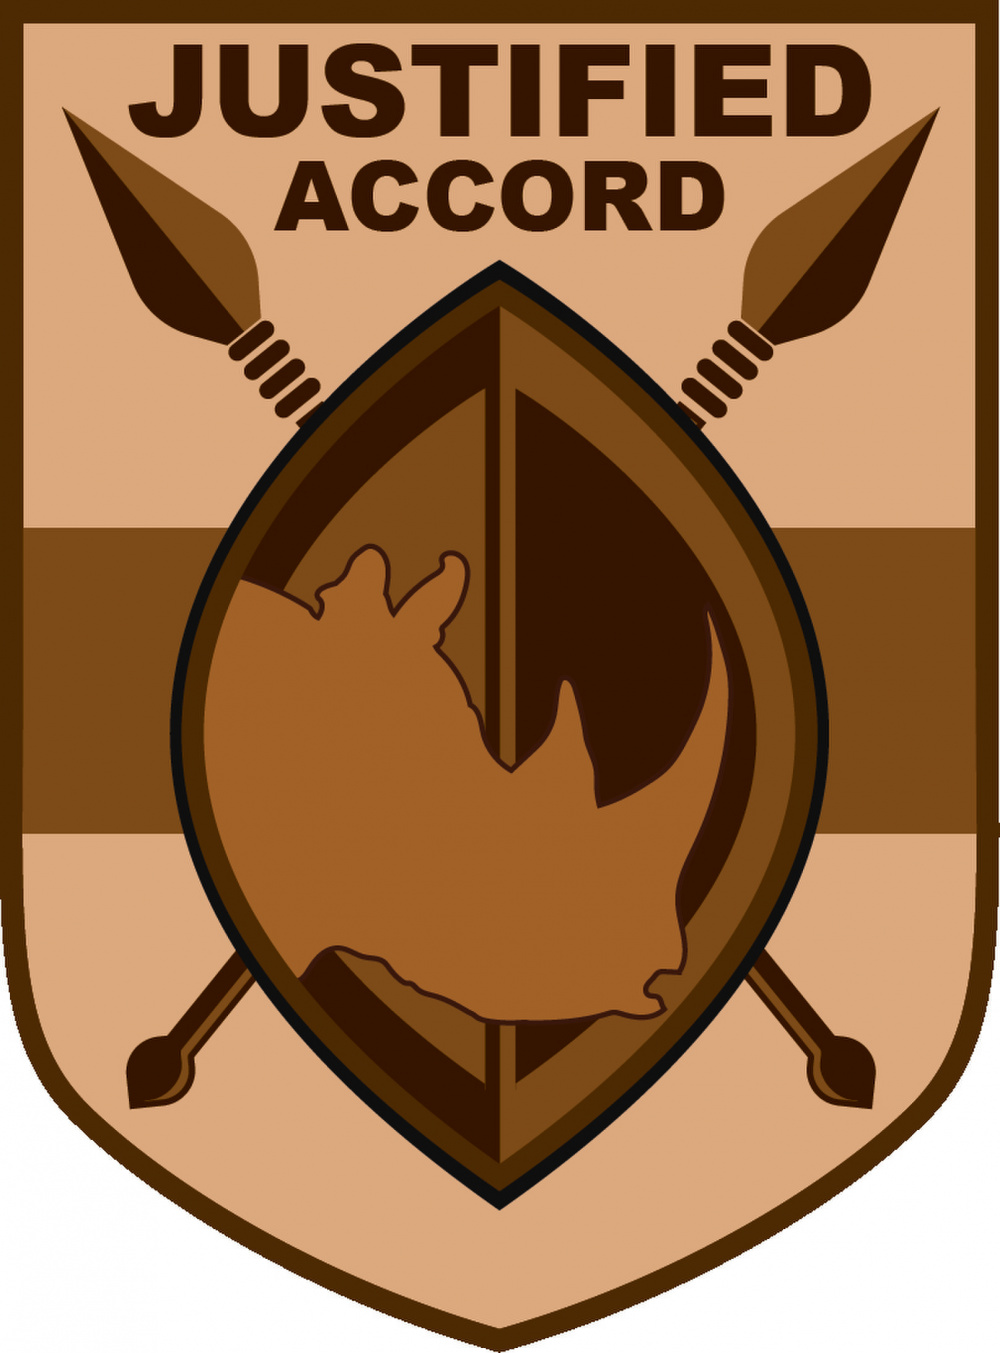 Justified Accord 23 Graphic